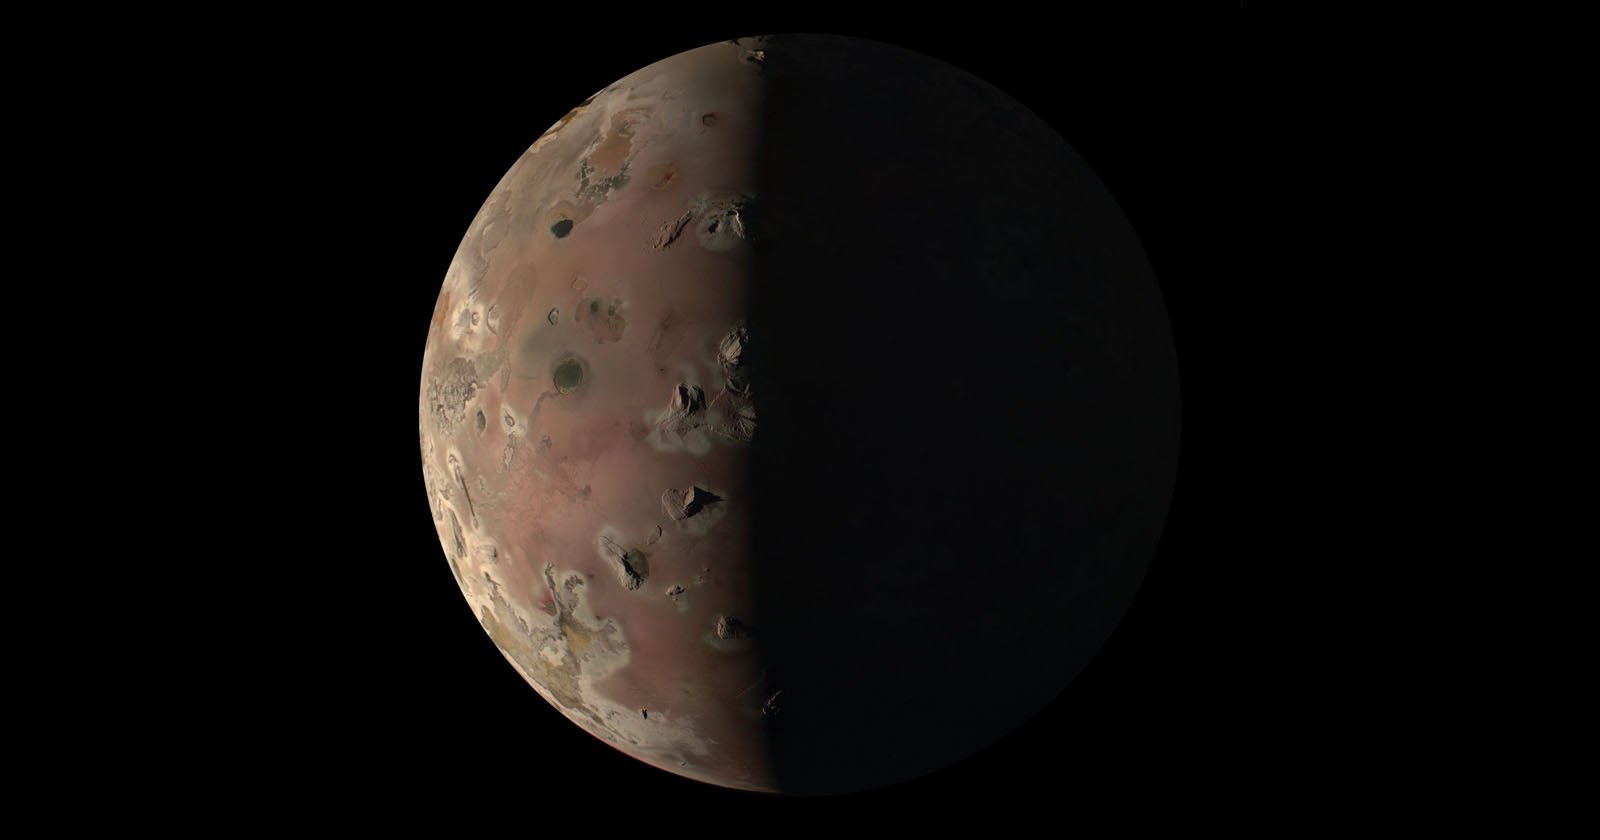 Juno Captures Incredible Image of Jupiters Moon Io During Closest Flyby